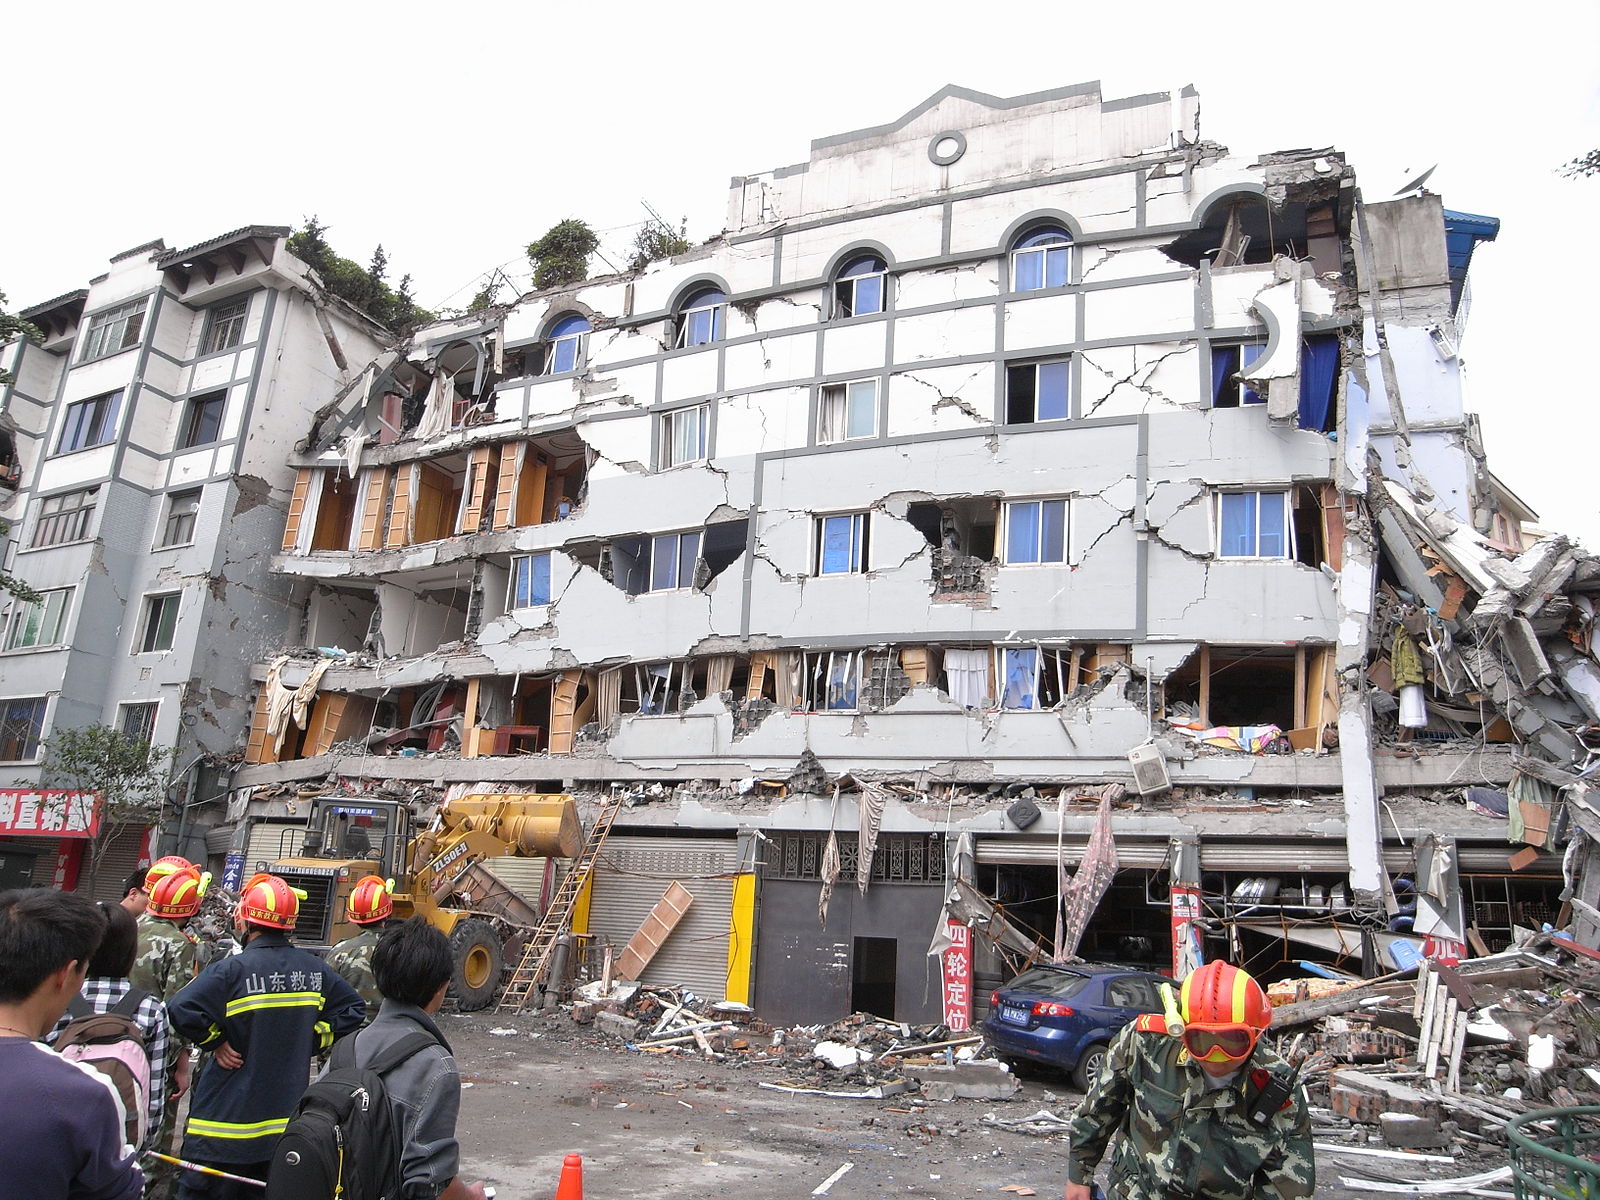 A collapsed building during the May 2008 magnitude-7.9 Great Sichuan earthquake (Source: Wikimedia Commons)